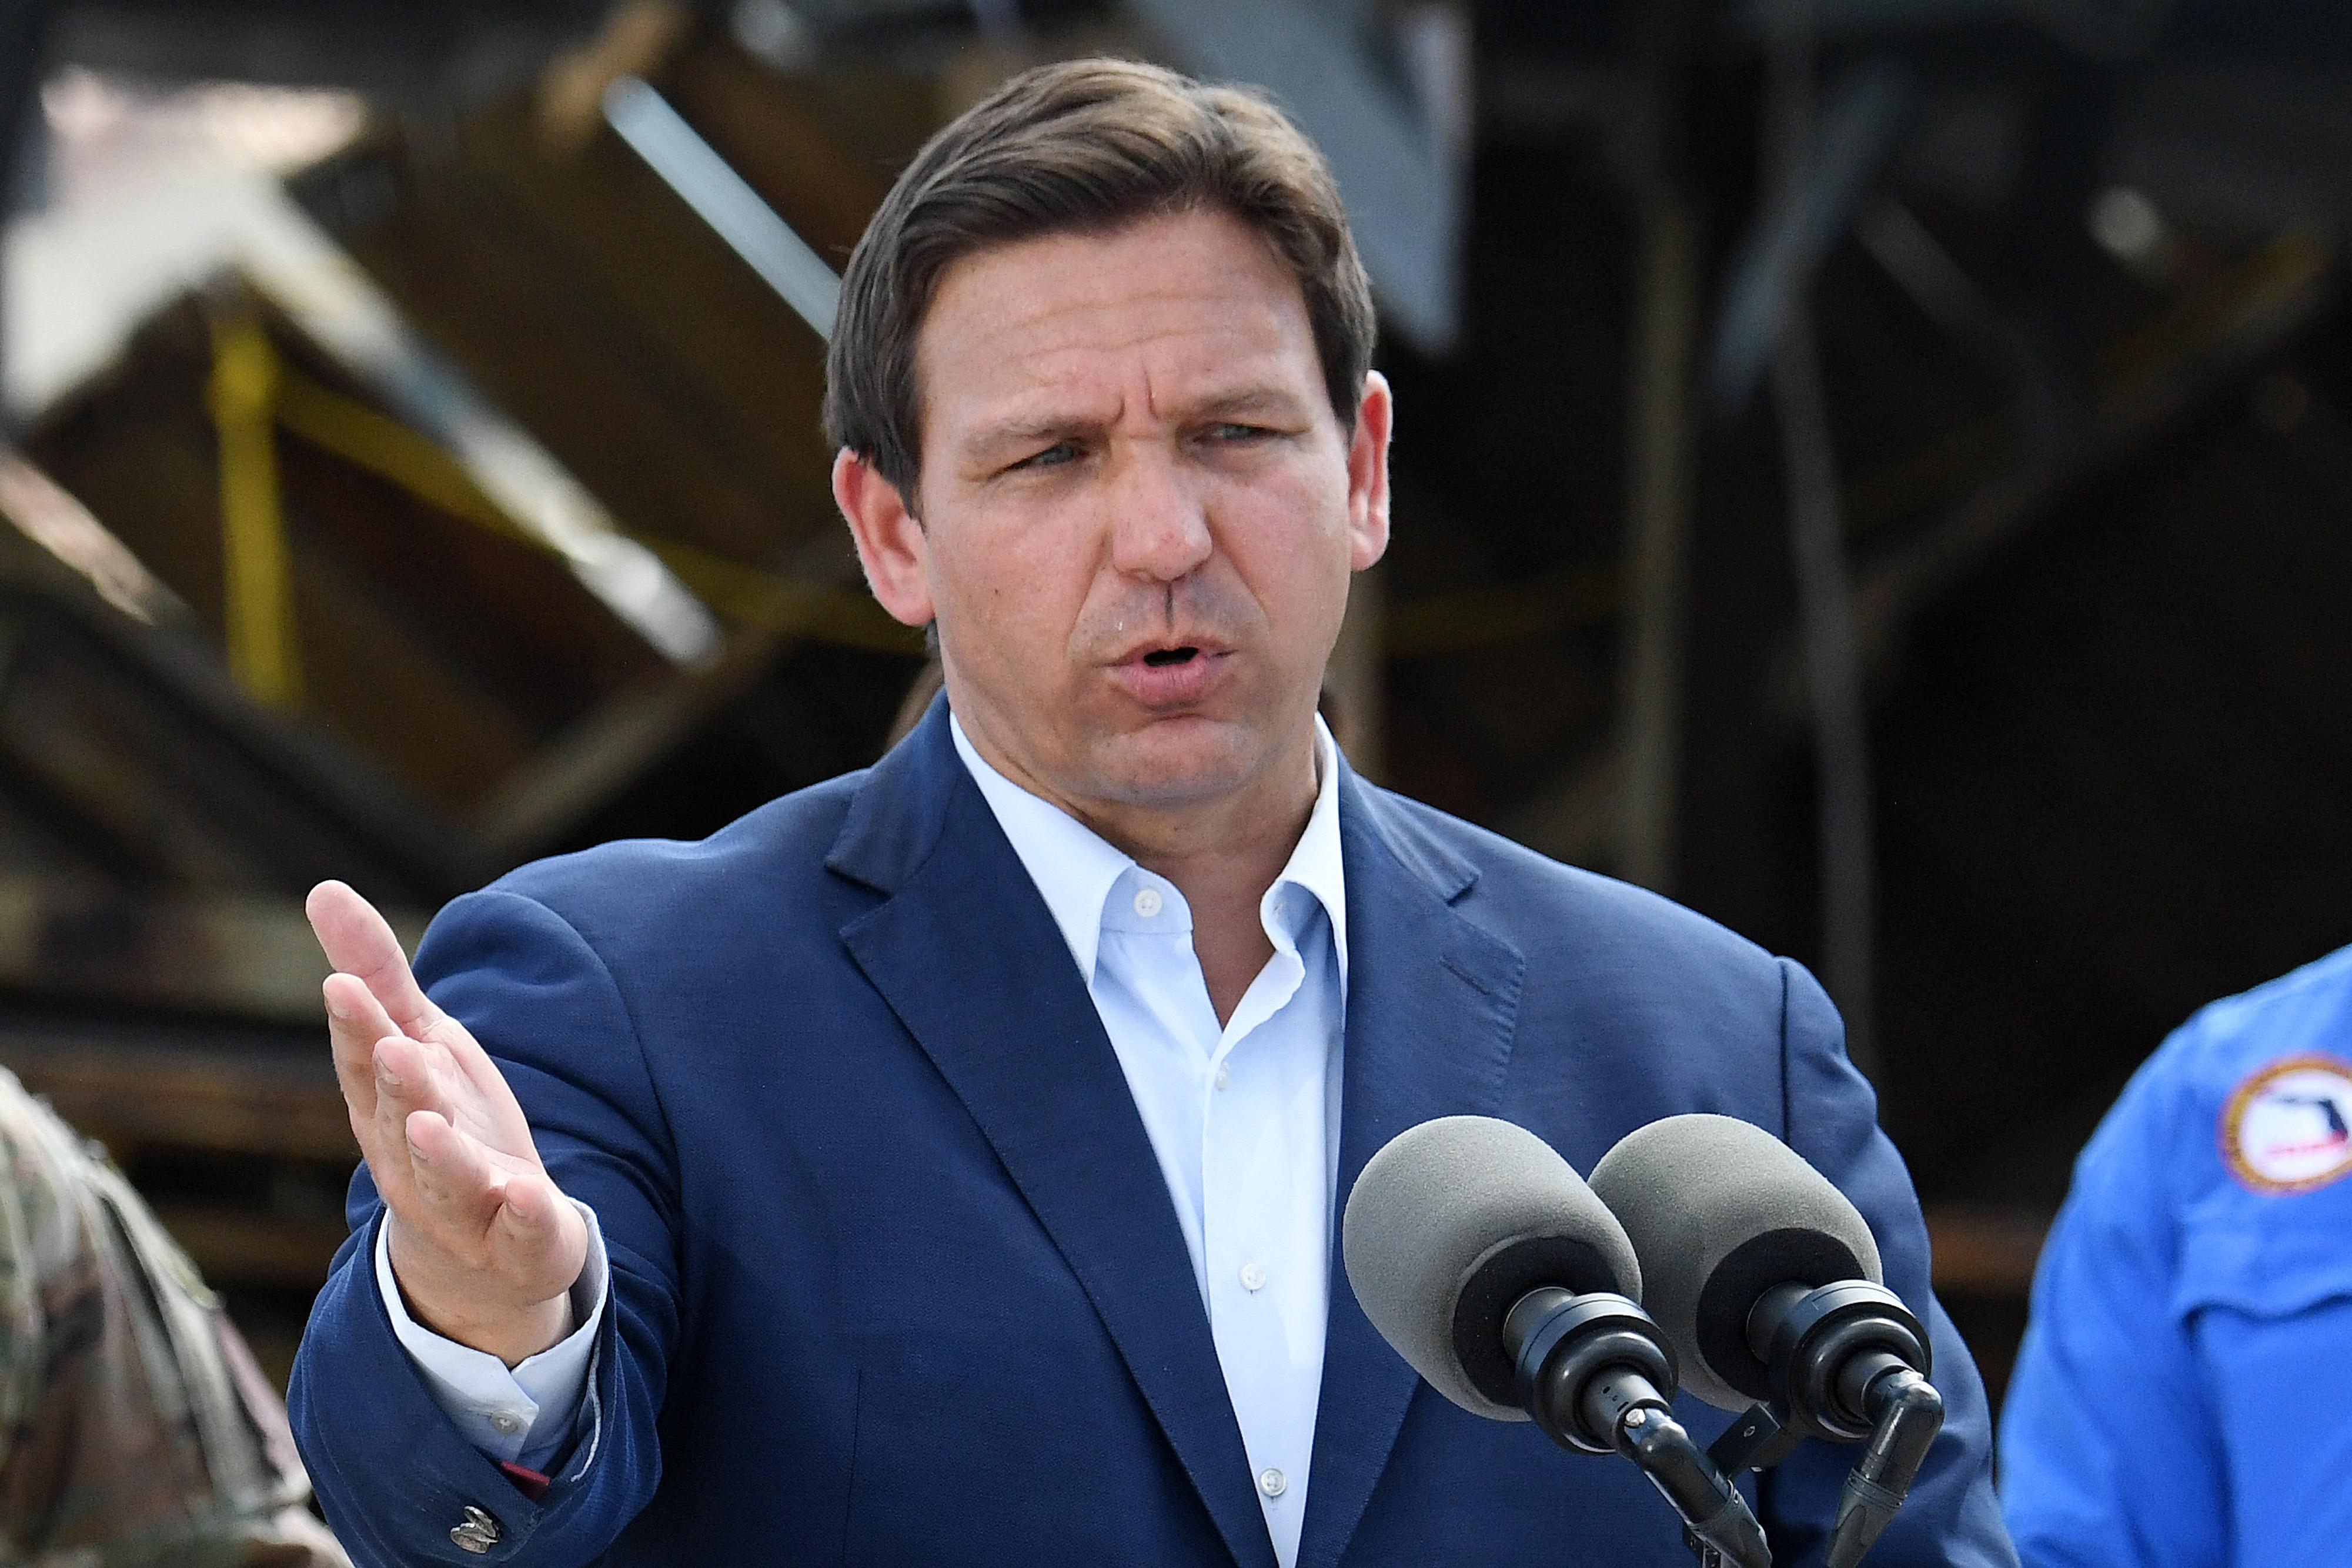 DeSantis gestures at an outdoor press conference.